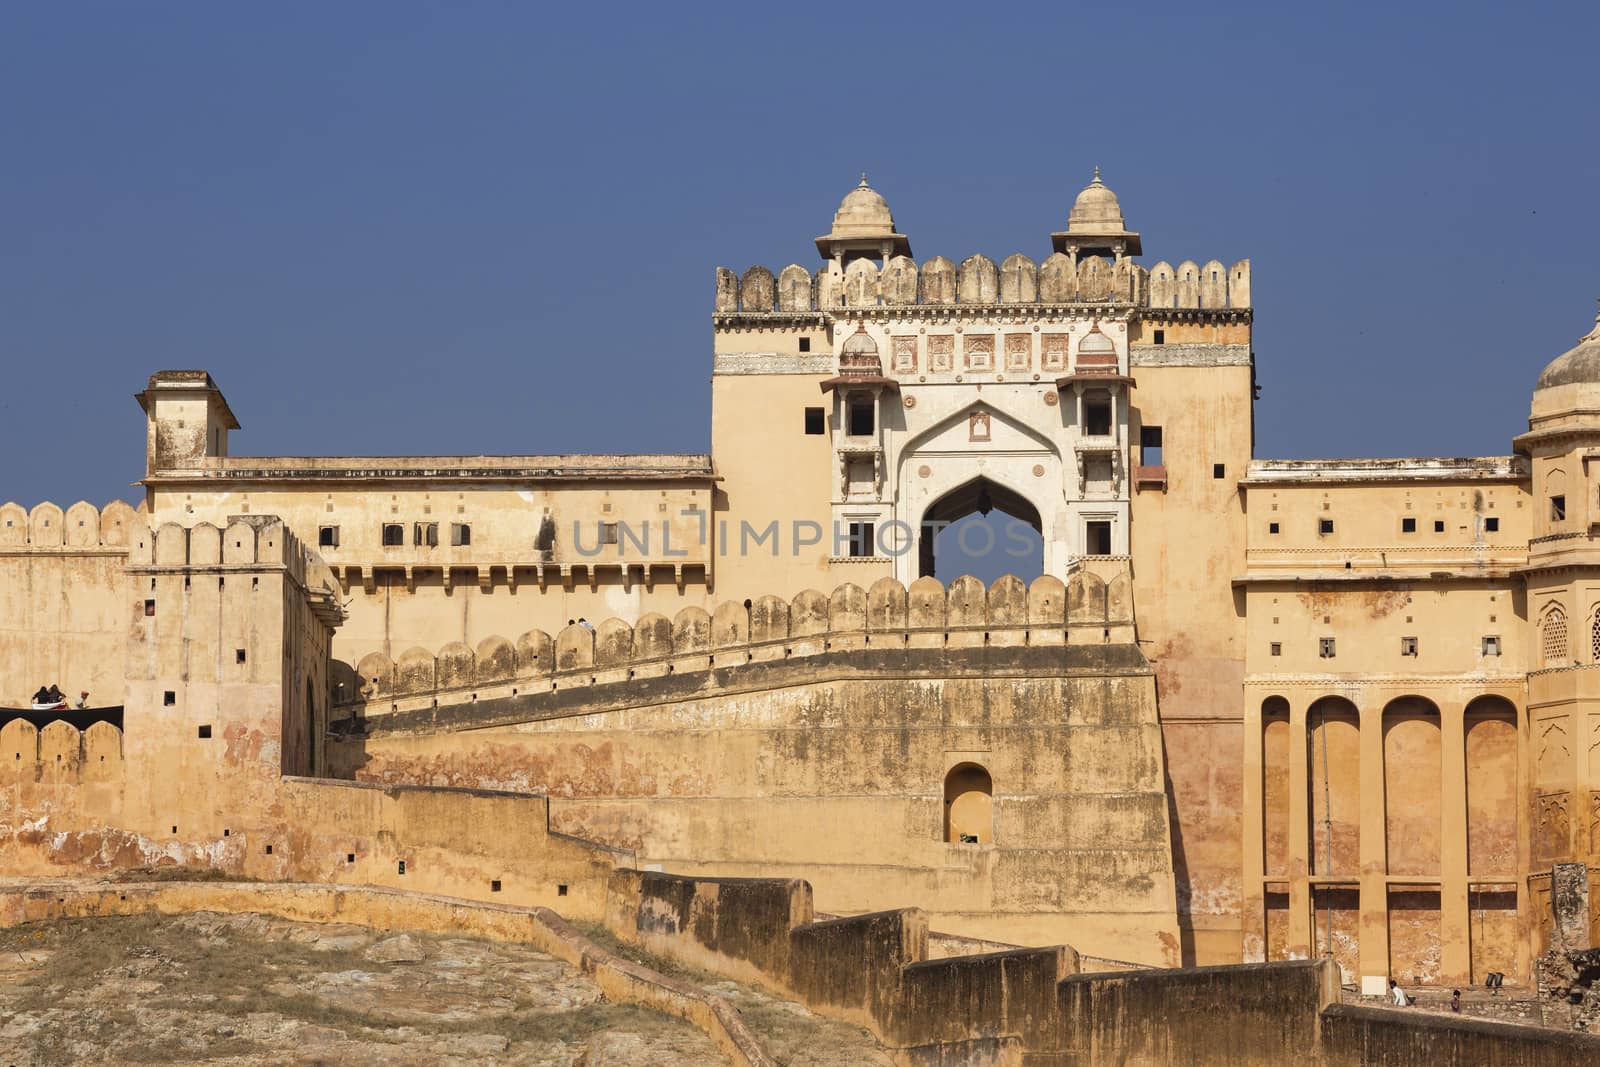 Gate and details of Amber Fort on the outskirts of Jaipur, Rajasthan, India